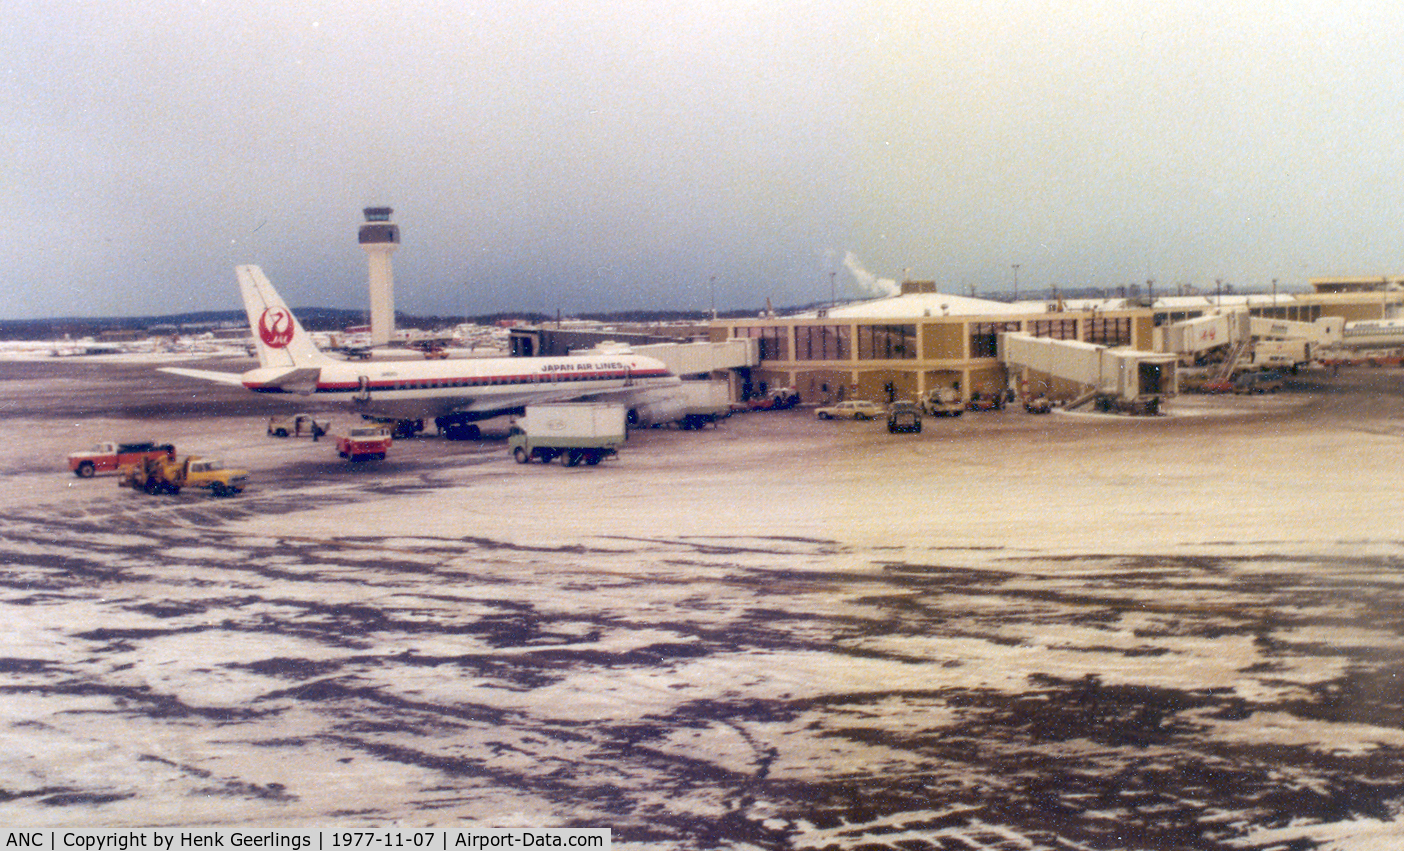 Ted Stevens Anchorage International Airport (ANC) - Stop at ANC on the way from AMS to TYO , Nov 1977